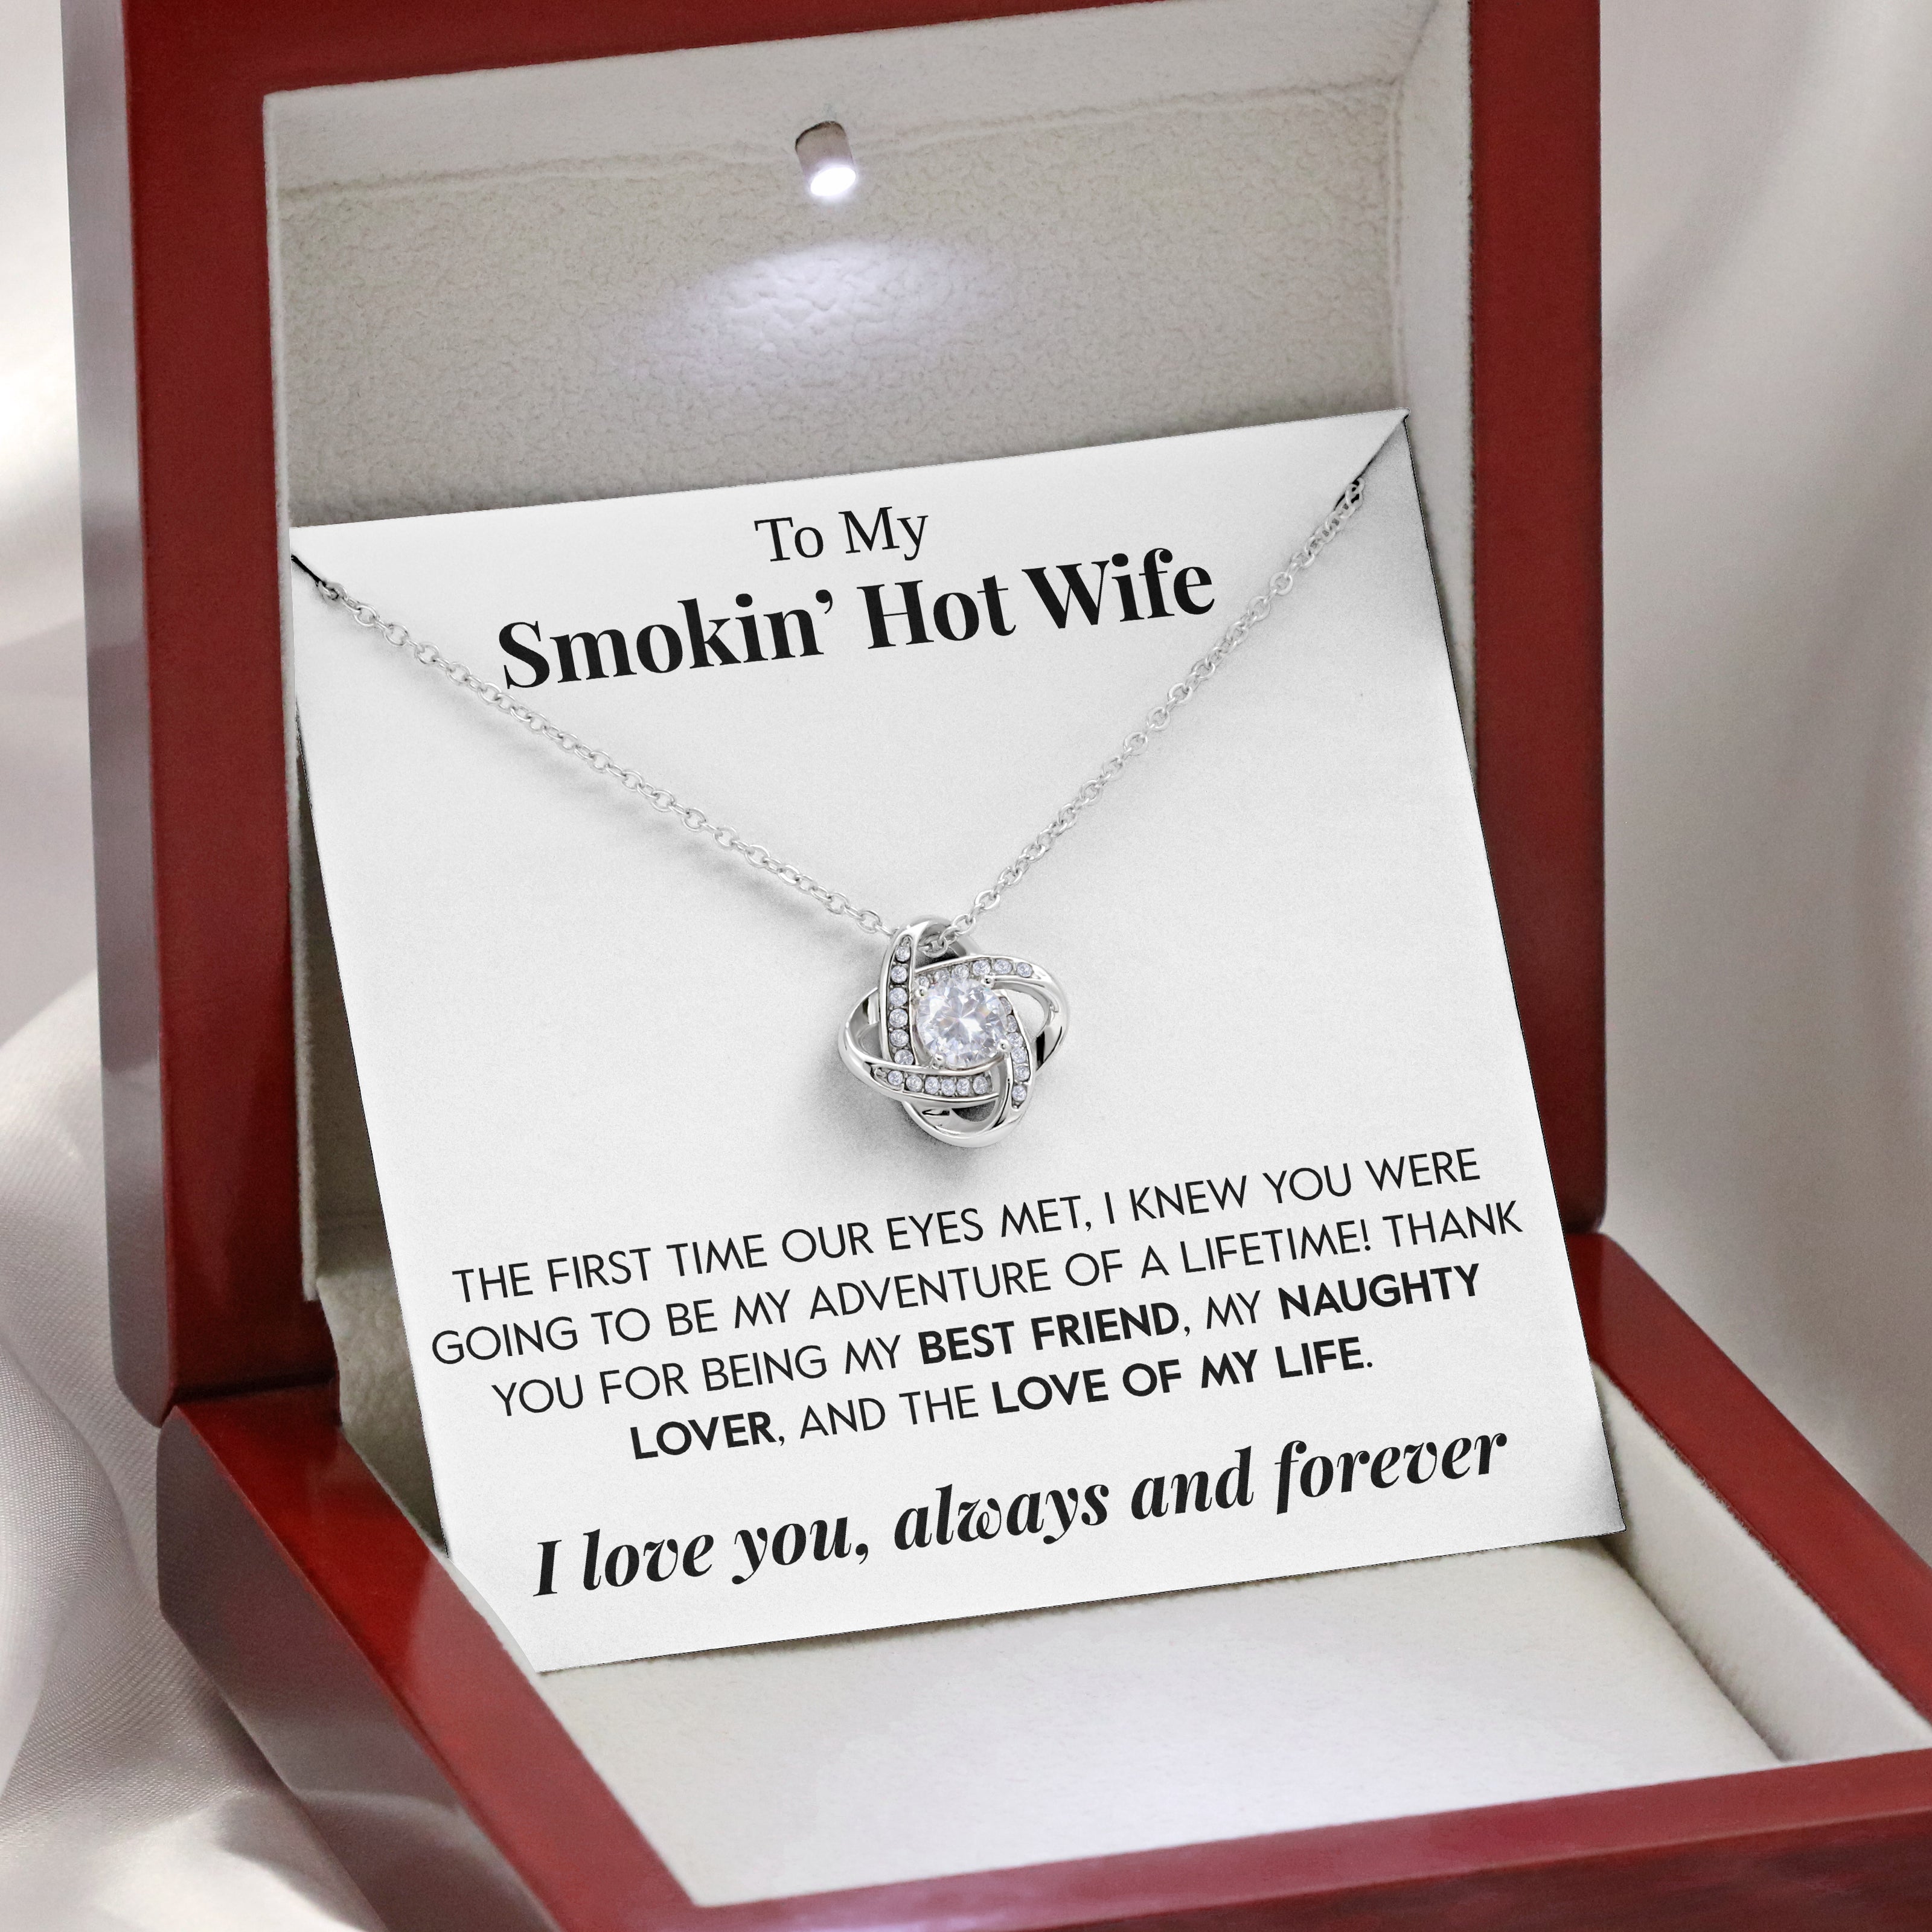 To My Smokin' Hot Wife | "Adventure of a Lifetime" | Love Knot Necklace